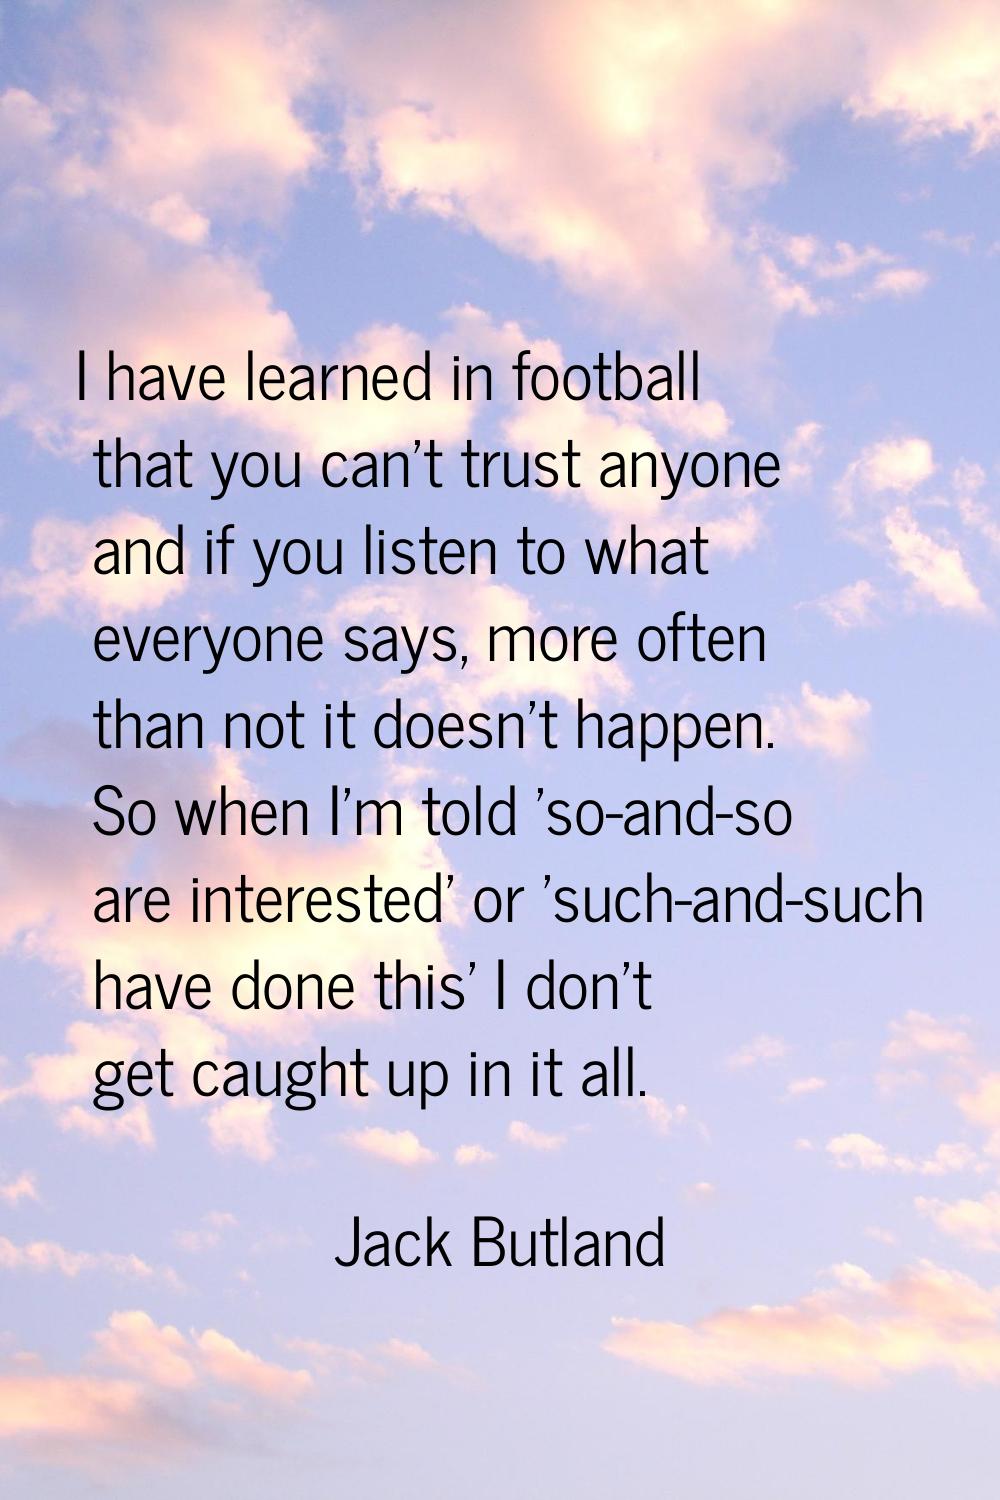 I have learned in football that you can't trust anyone and if you listen to what everyone says, mor